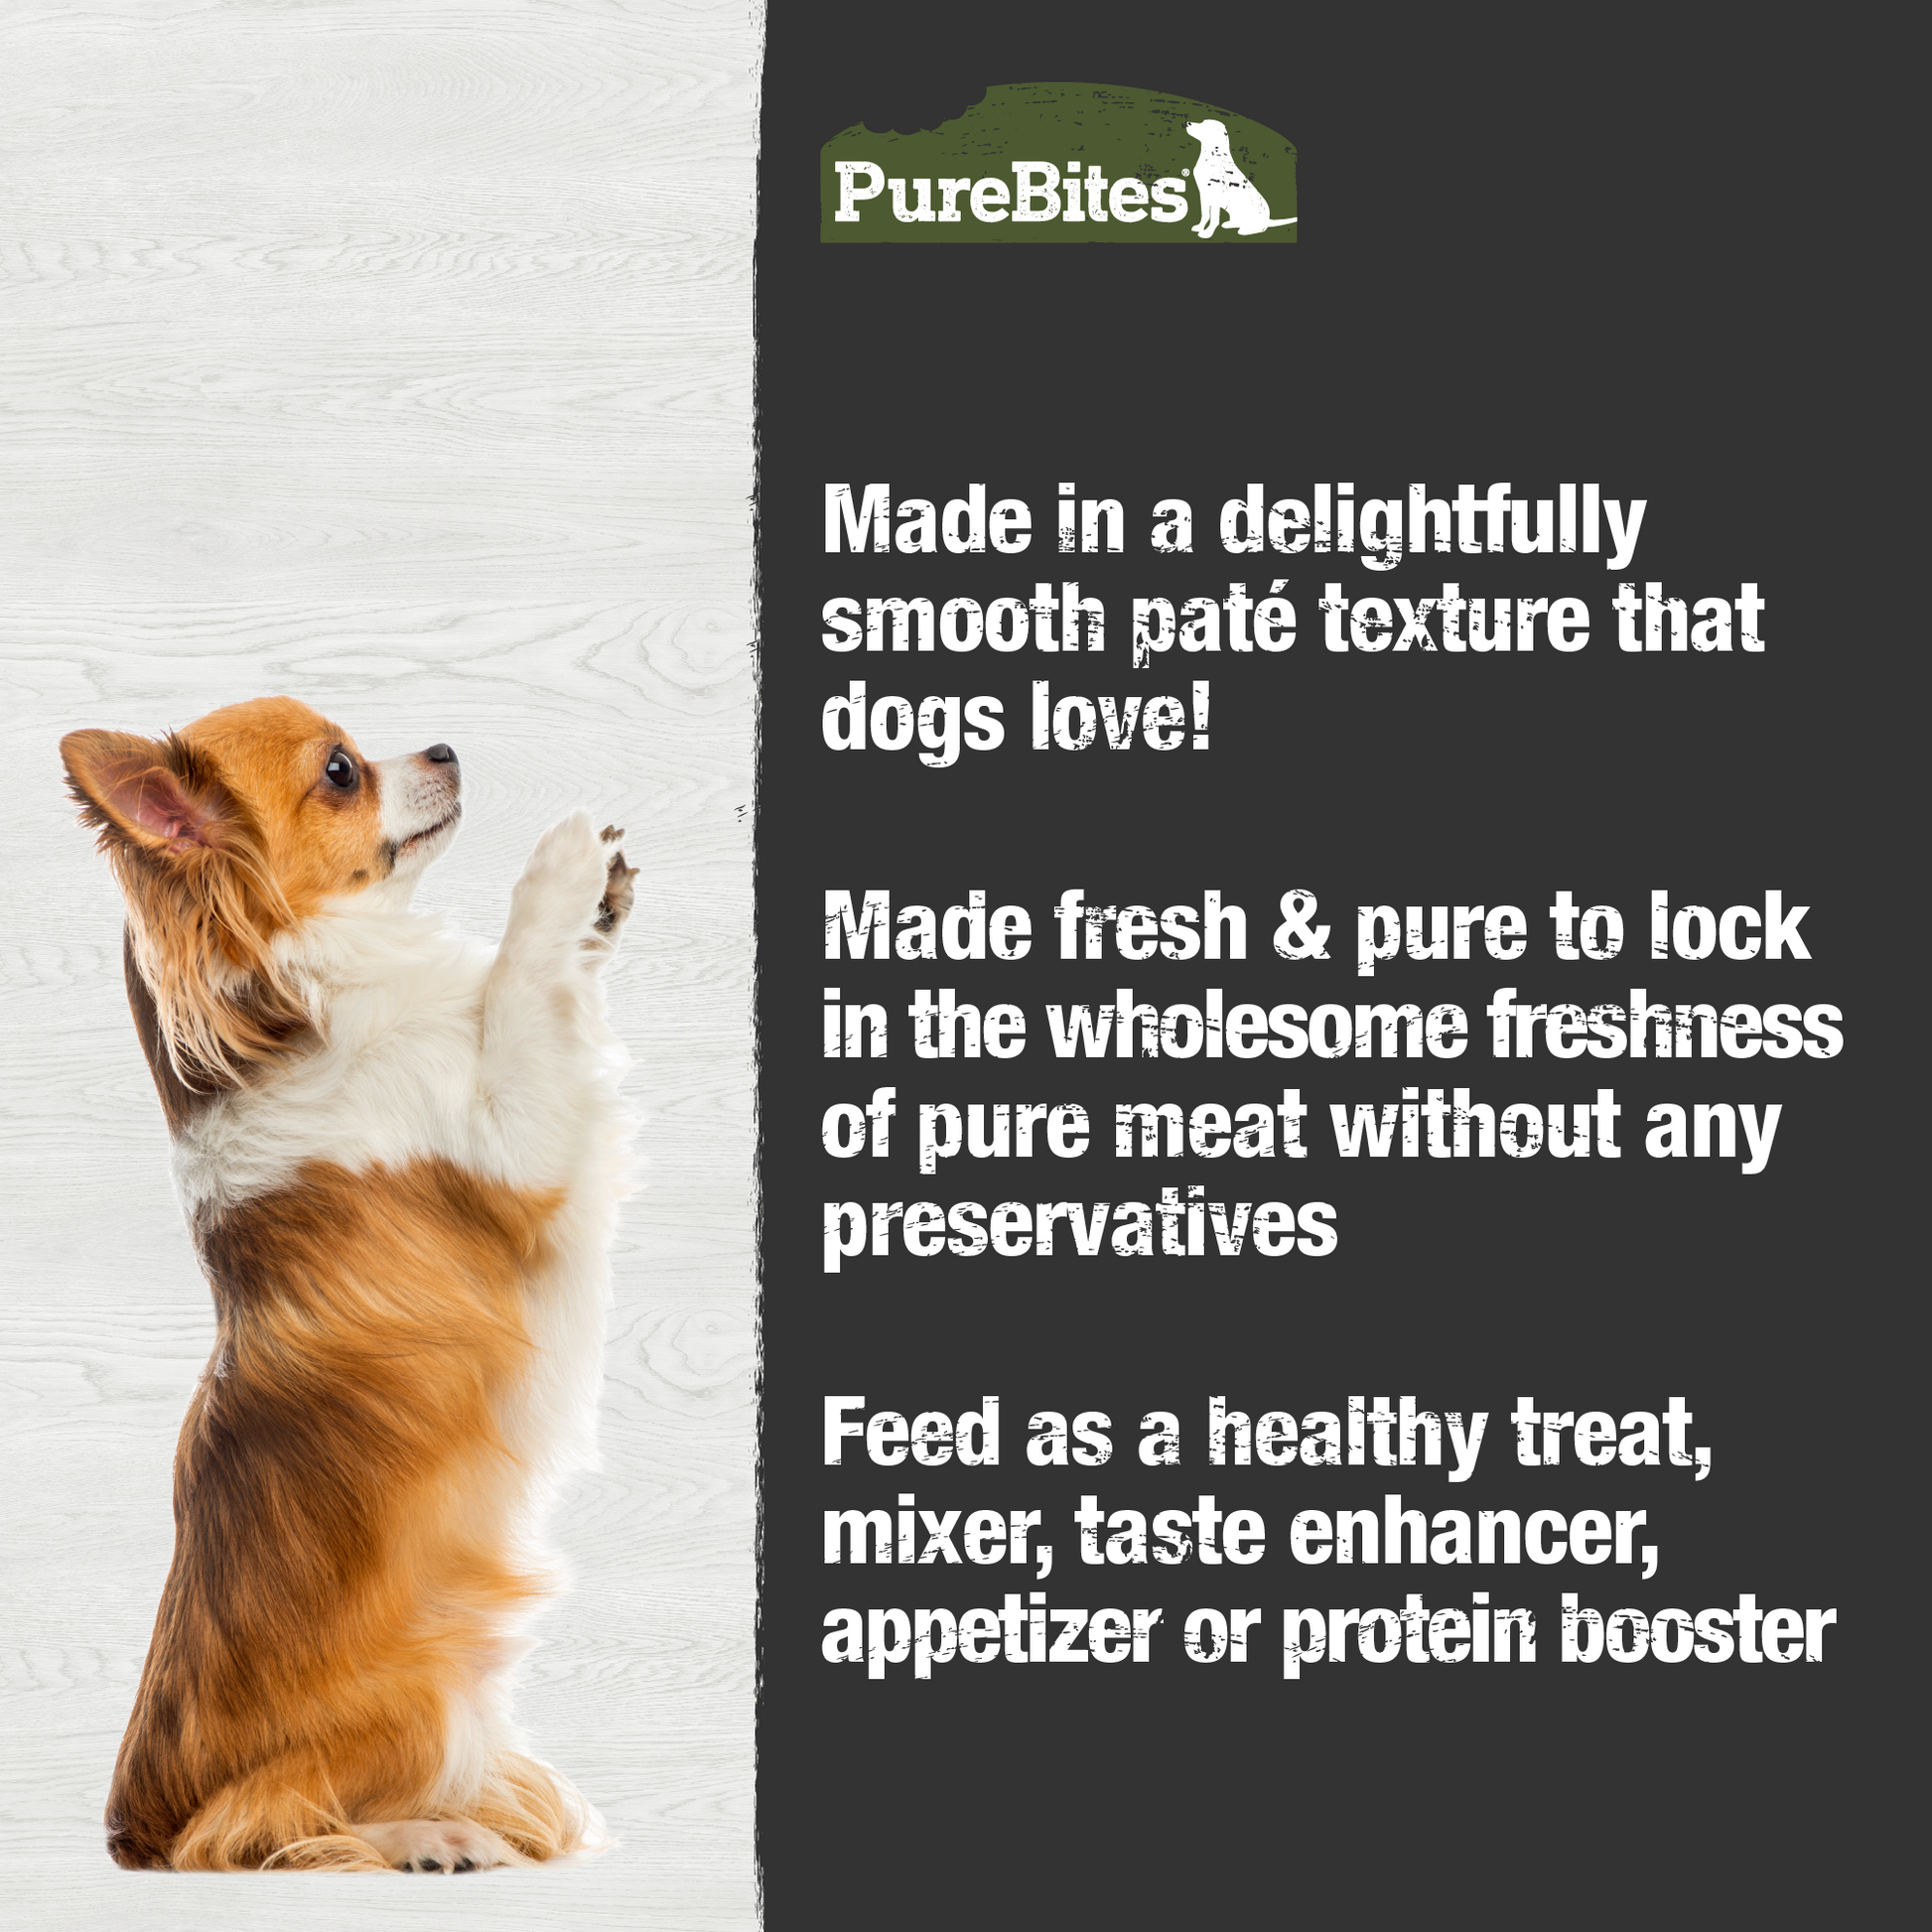 Made fresh & pure means more protein and nutrients packed into every can. The chicken & beef in our patés is delicately steamed to help preserve the ingredient's taste, and nutrition, and mirror a dog’s ancestral diet